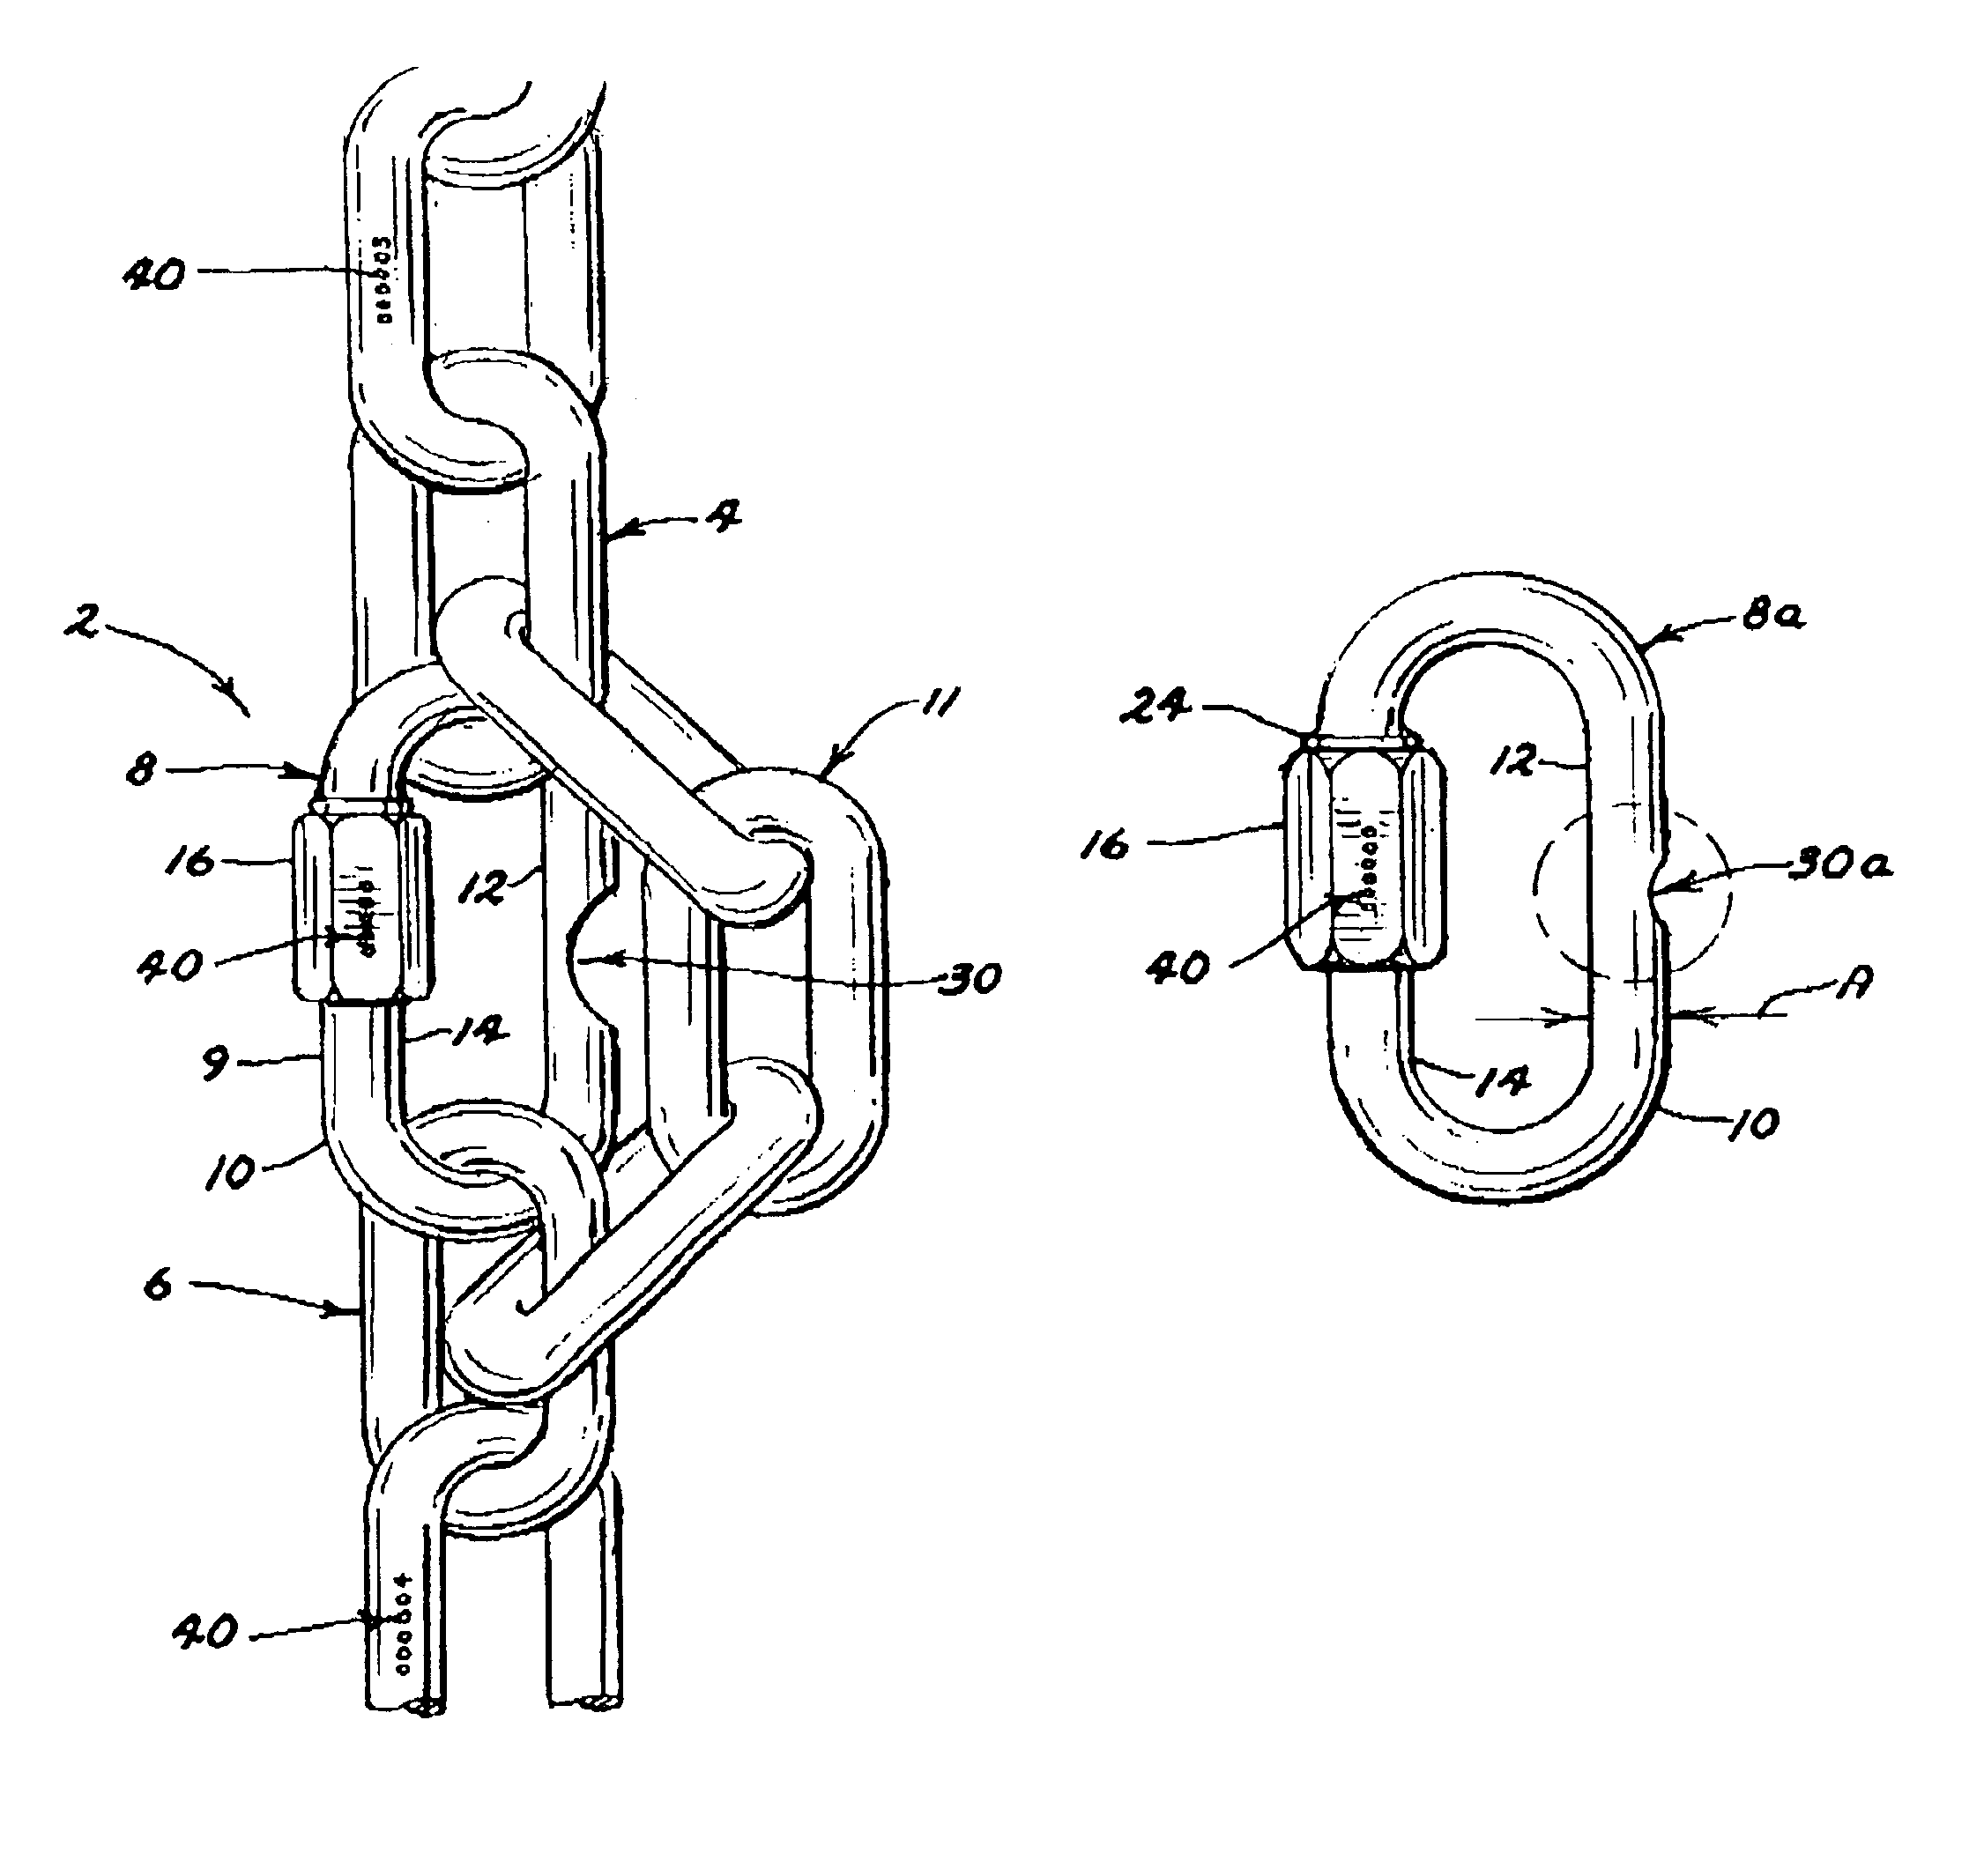 Load bearing device including overboard indicator